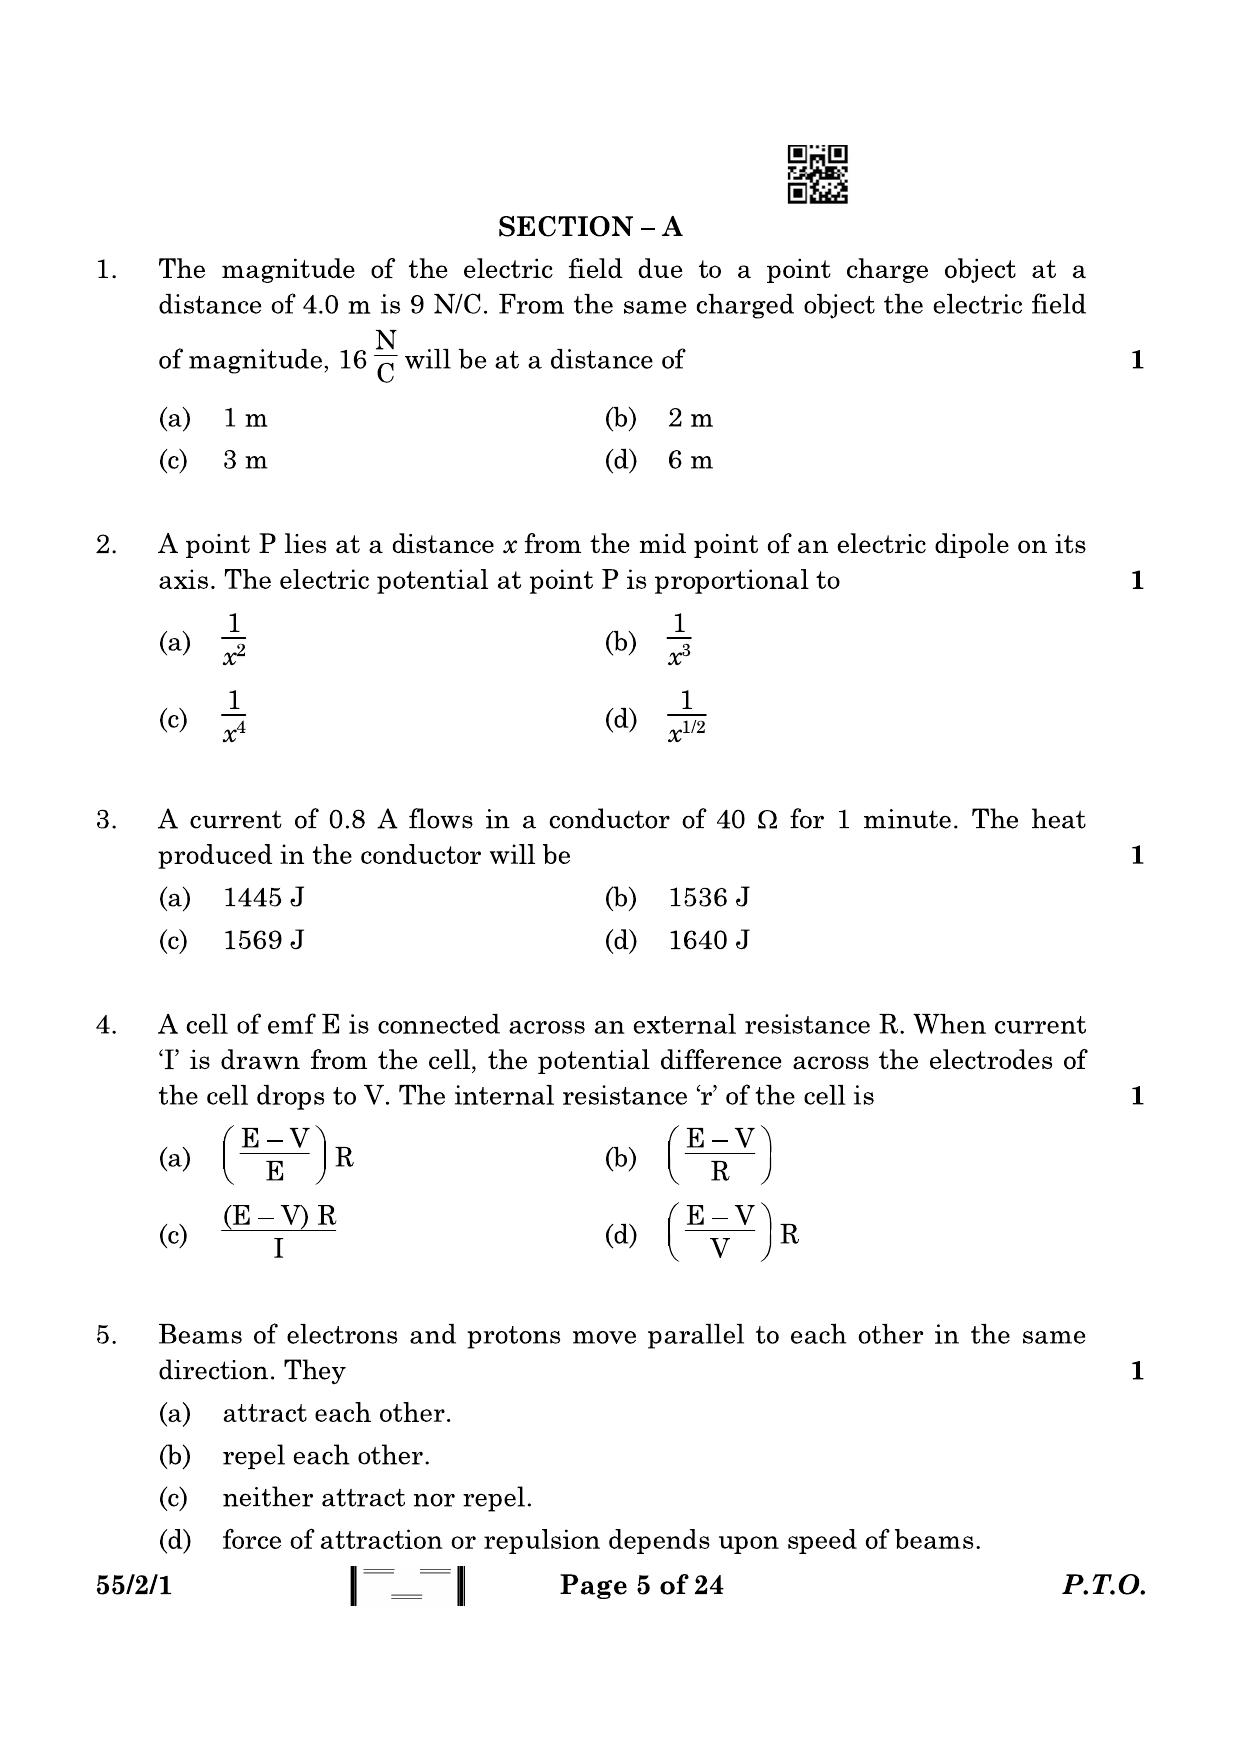 CBSE Class 12 55-2-1 Physics 2023 Question Paper - Page 5